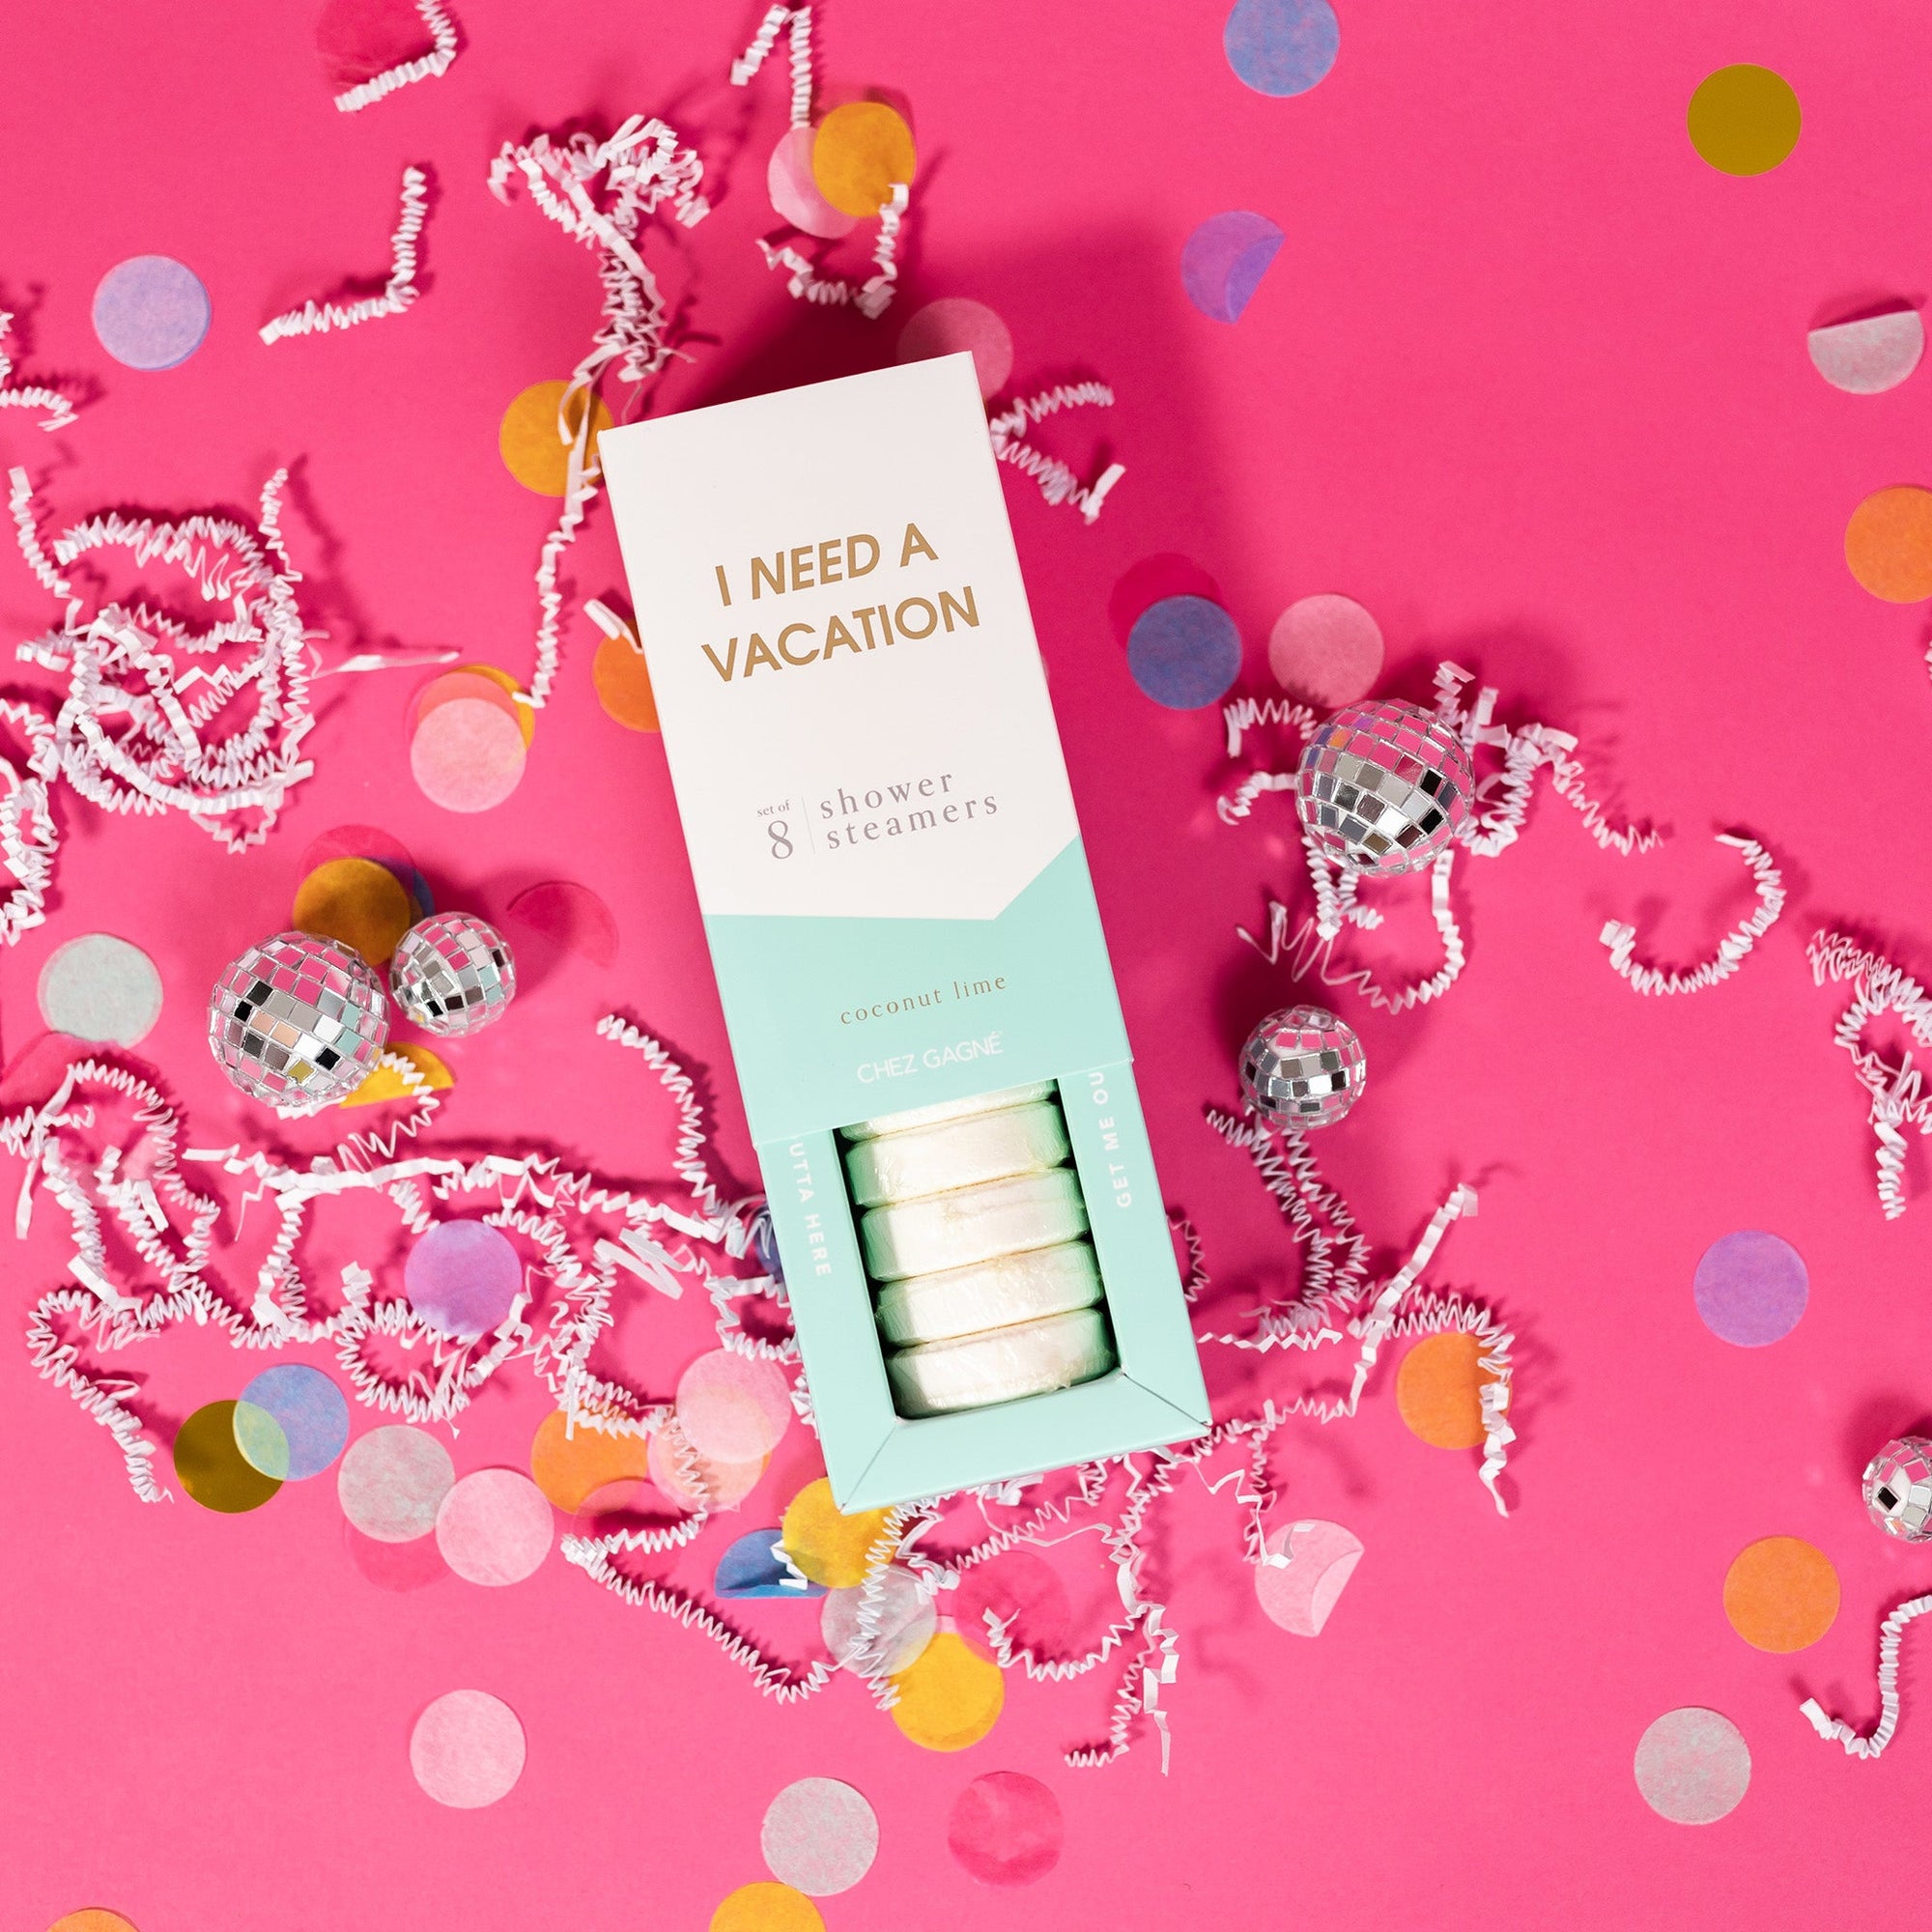 On a hot pink background sits an opened box with white crinkle and big, colorful confetti scattered around. There are mini disco balls. This picture is a close-up of a white and pool blue package that says "I NEED A VACATION" in gold foil, all caps block lettering. Under it says "set of 8" and " shower steamers" in grey, lowercase serif font. At the bottom it says "coconut lime" in gold foil, lower case serif font. The box is opened to reveal the white shower steamers in it. 